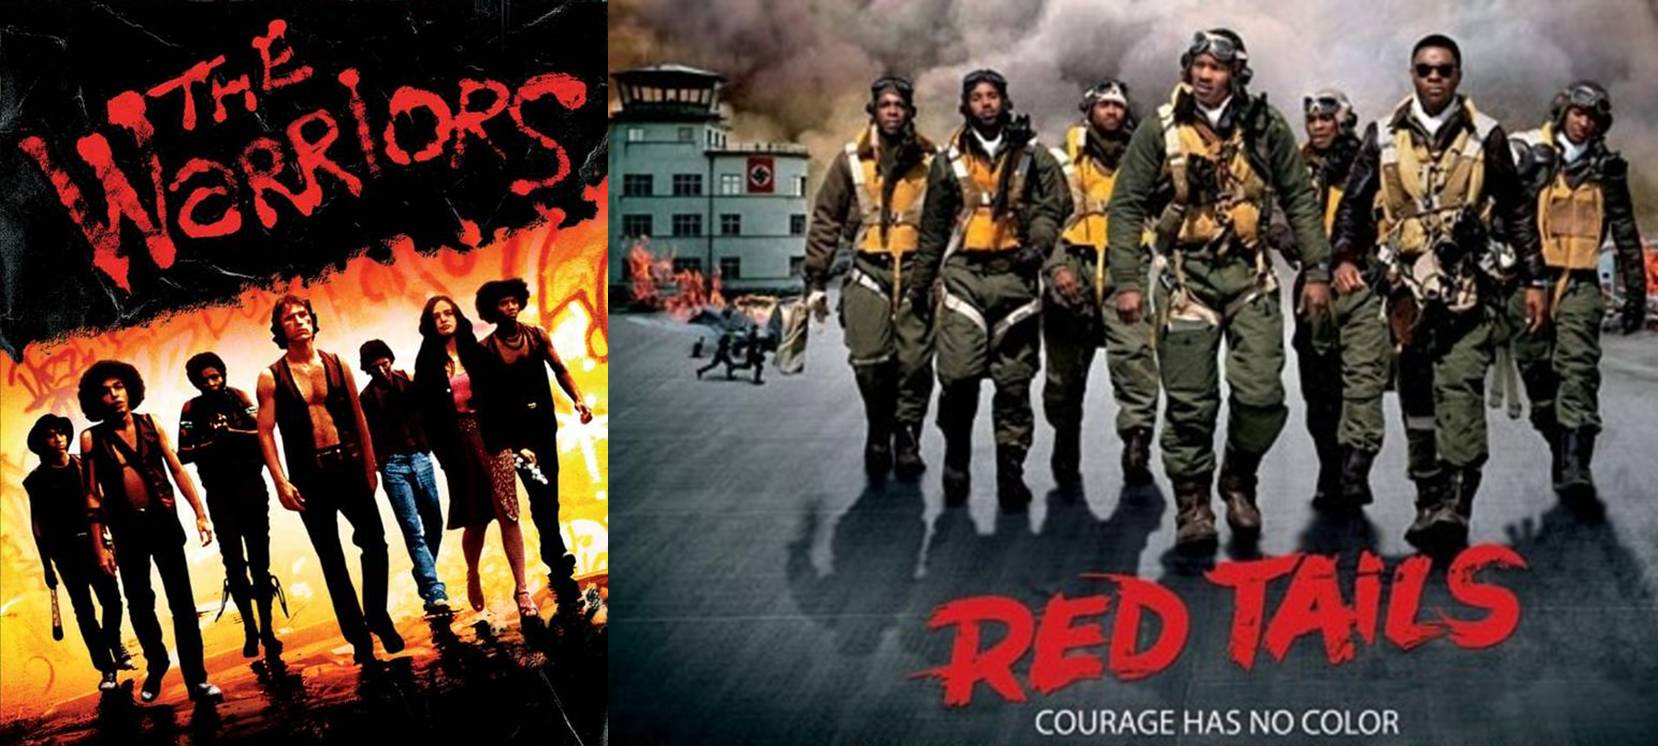 Is the Red Tails Movie Poster a Rip Off of the Classic Movie “The Warriors”?